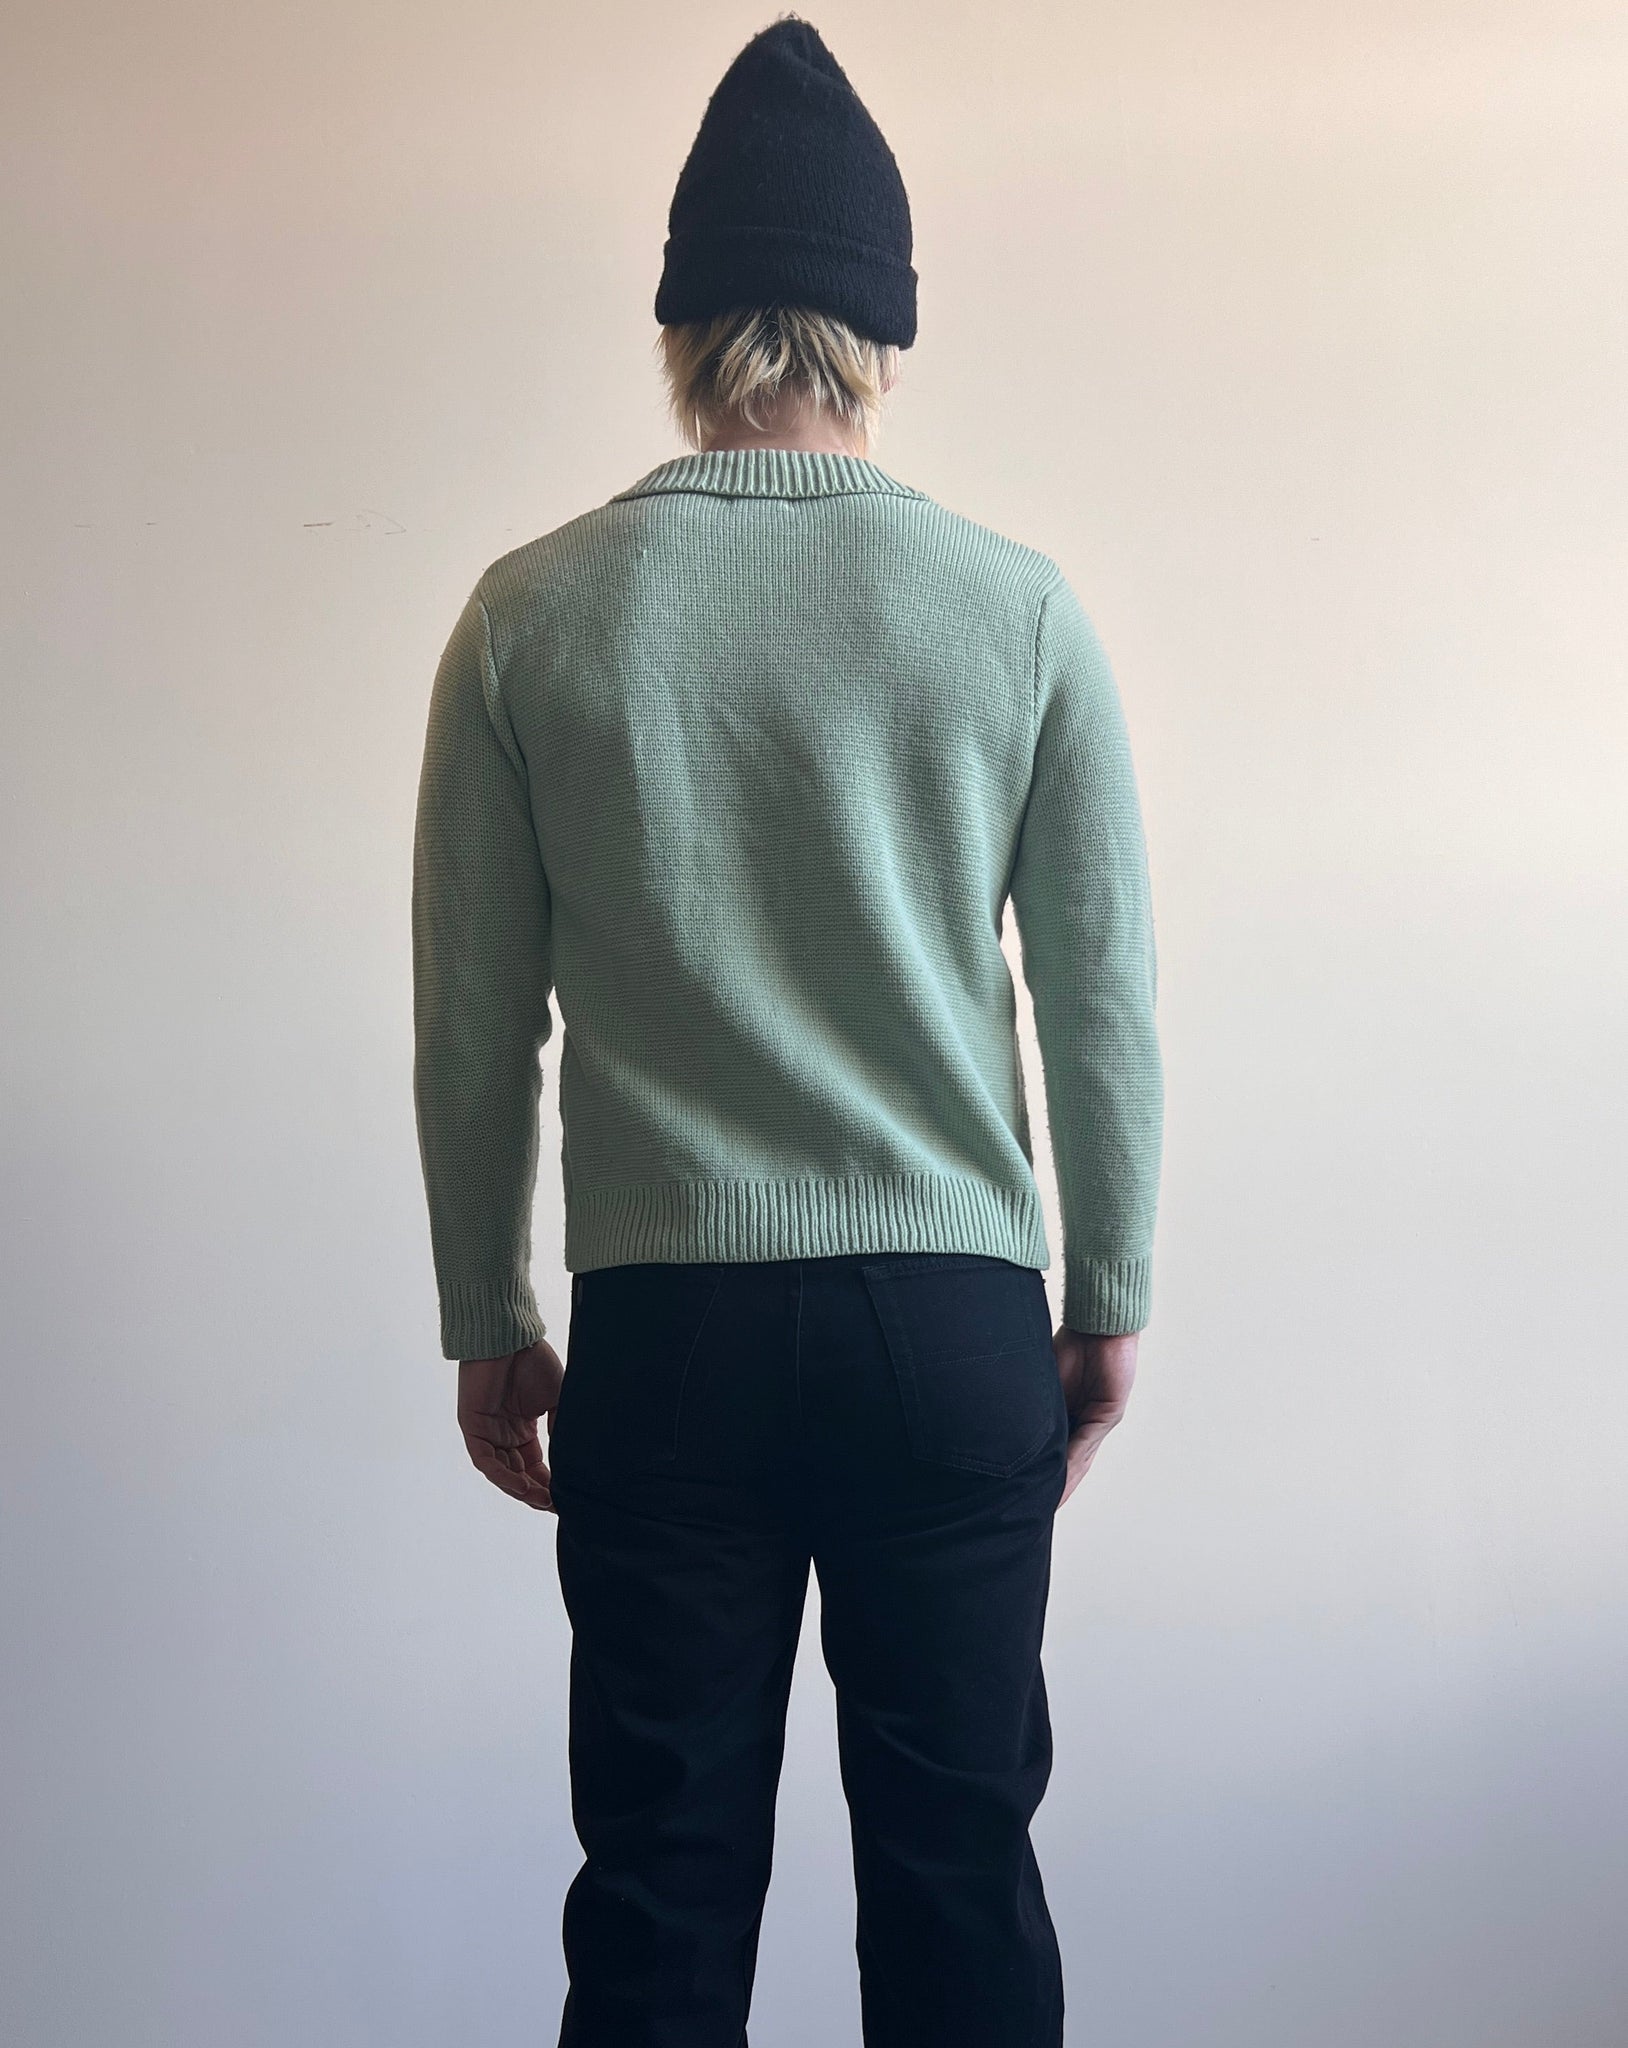 Classic Elements Light Green Collared Cardigan (S/M)